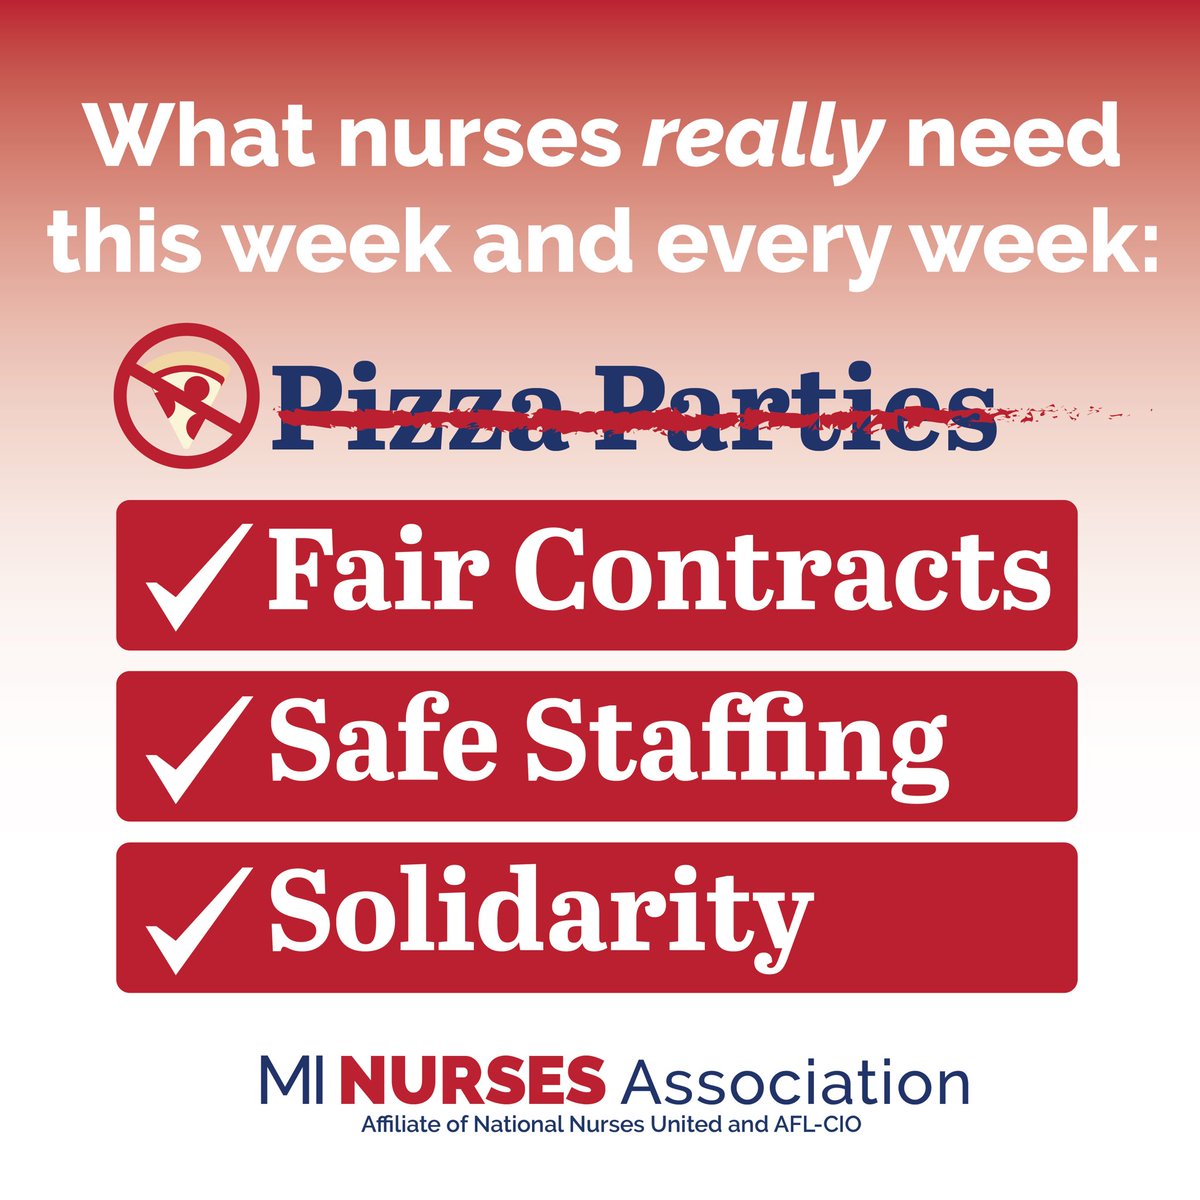 Celebrating Nurses Week by reminding employers that RNs deserve more than empty praise. What is the worst appreciation “gift” your employer has given you? Let us know in the comments! #NursesWeek